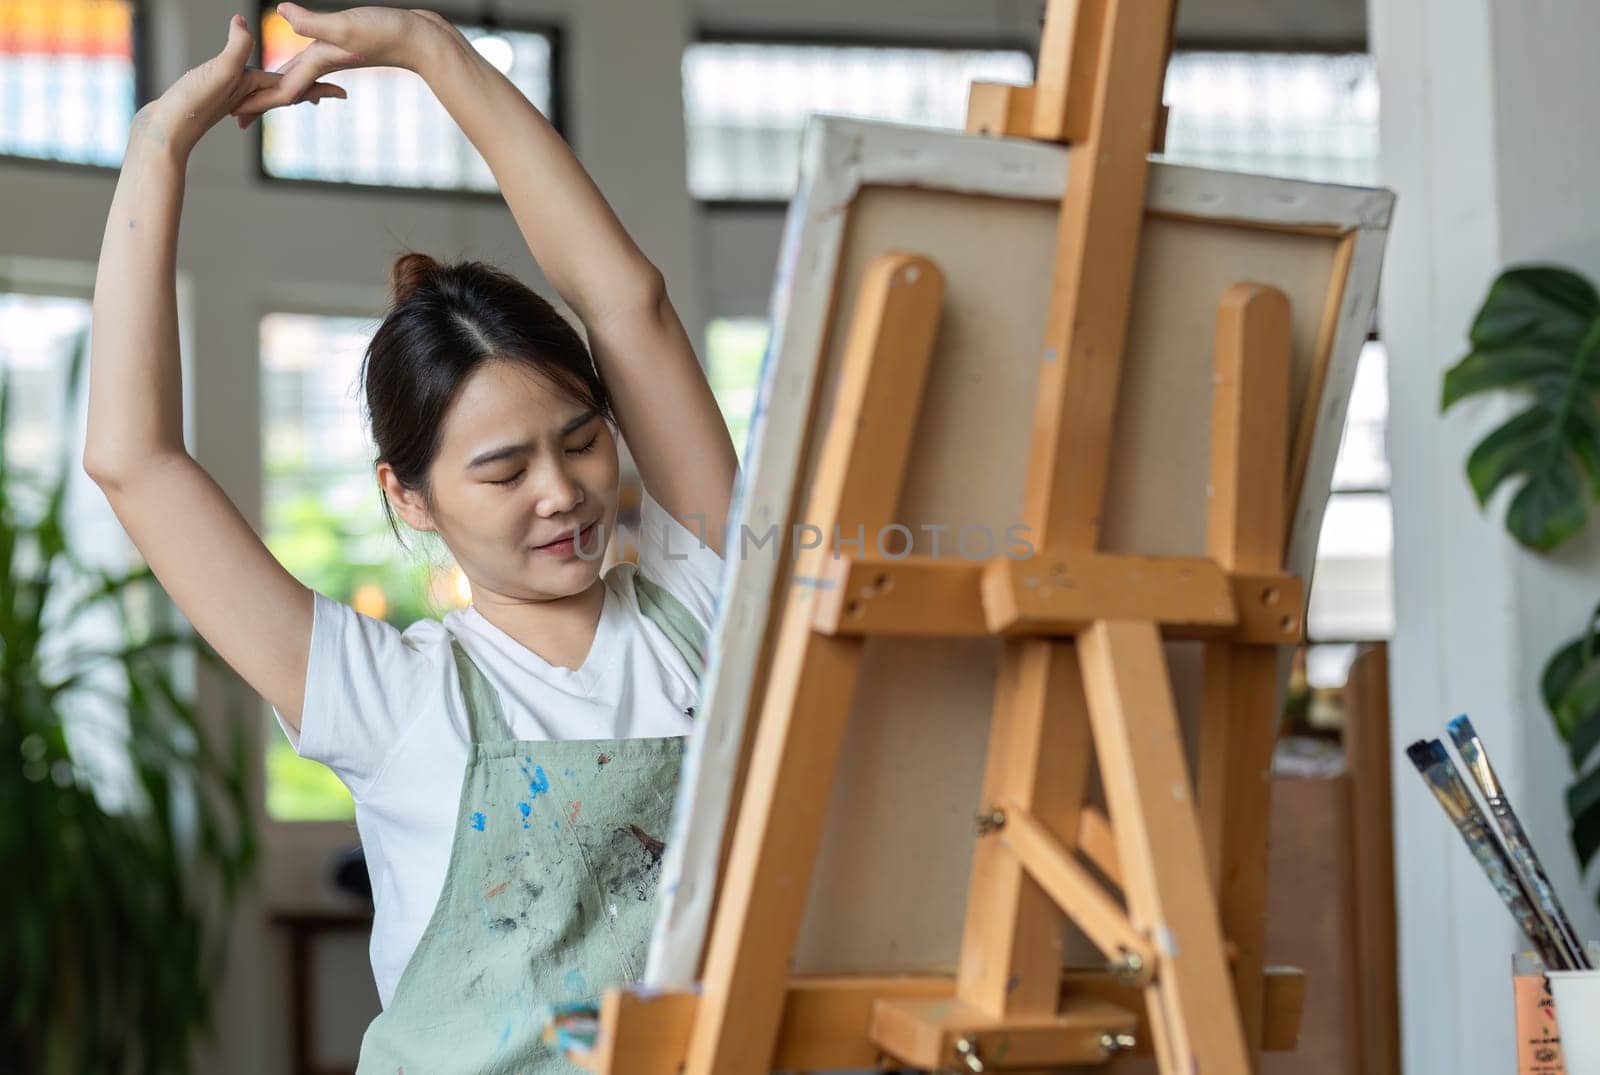 Young woman tired from painting stretches her muscles to relax after sitting and painting for a long time..